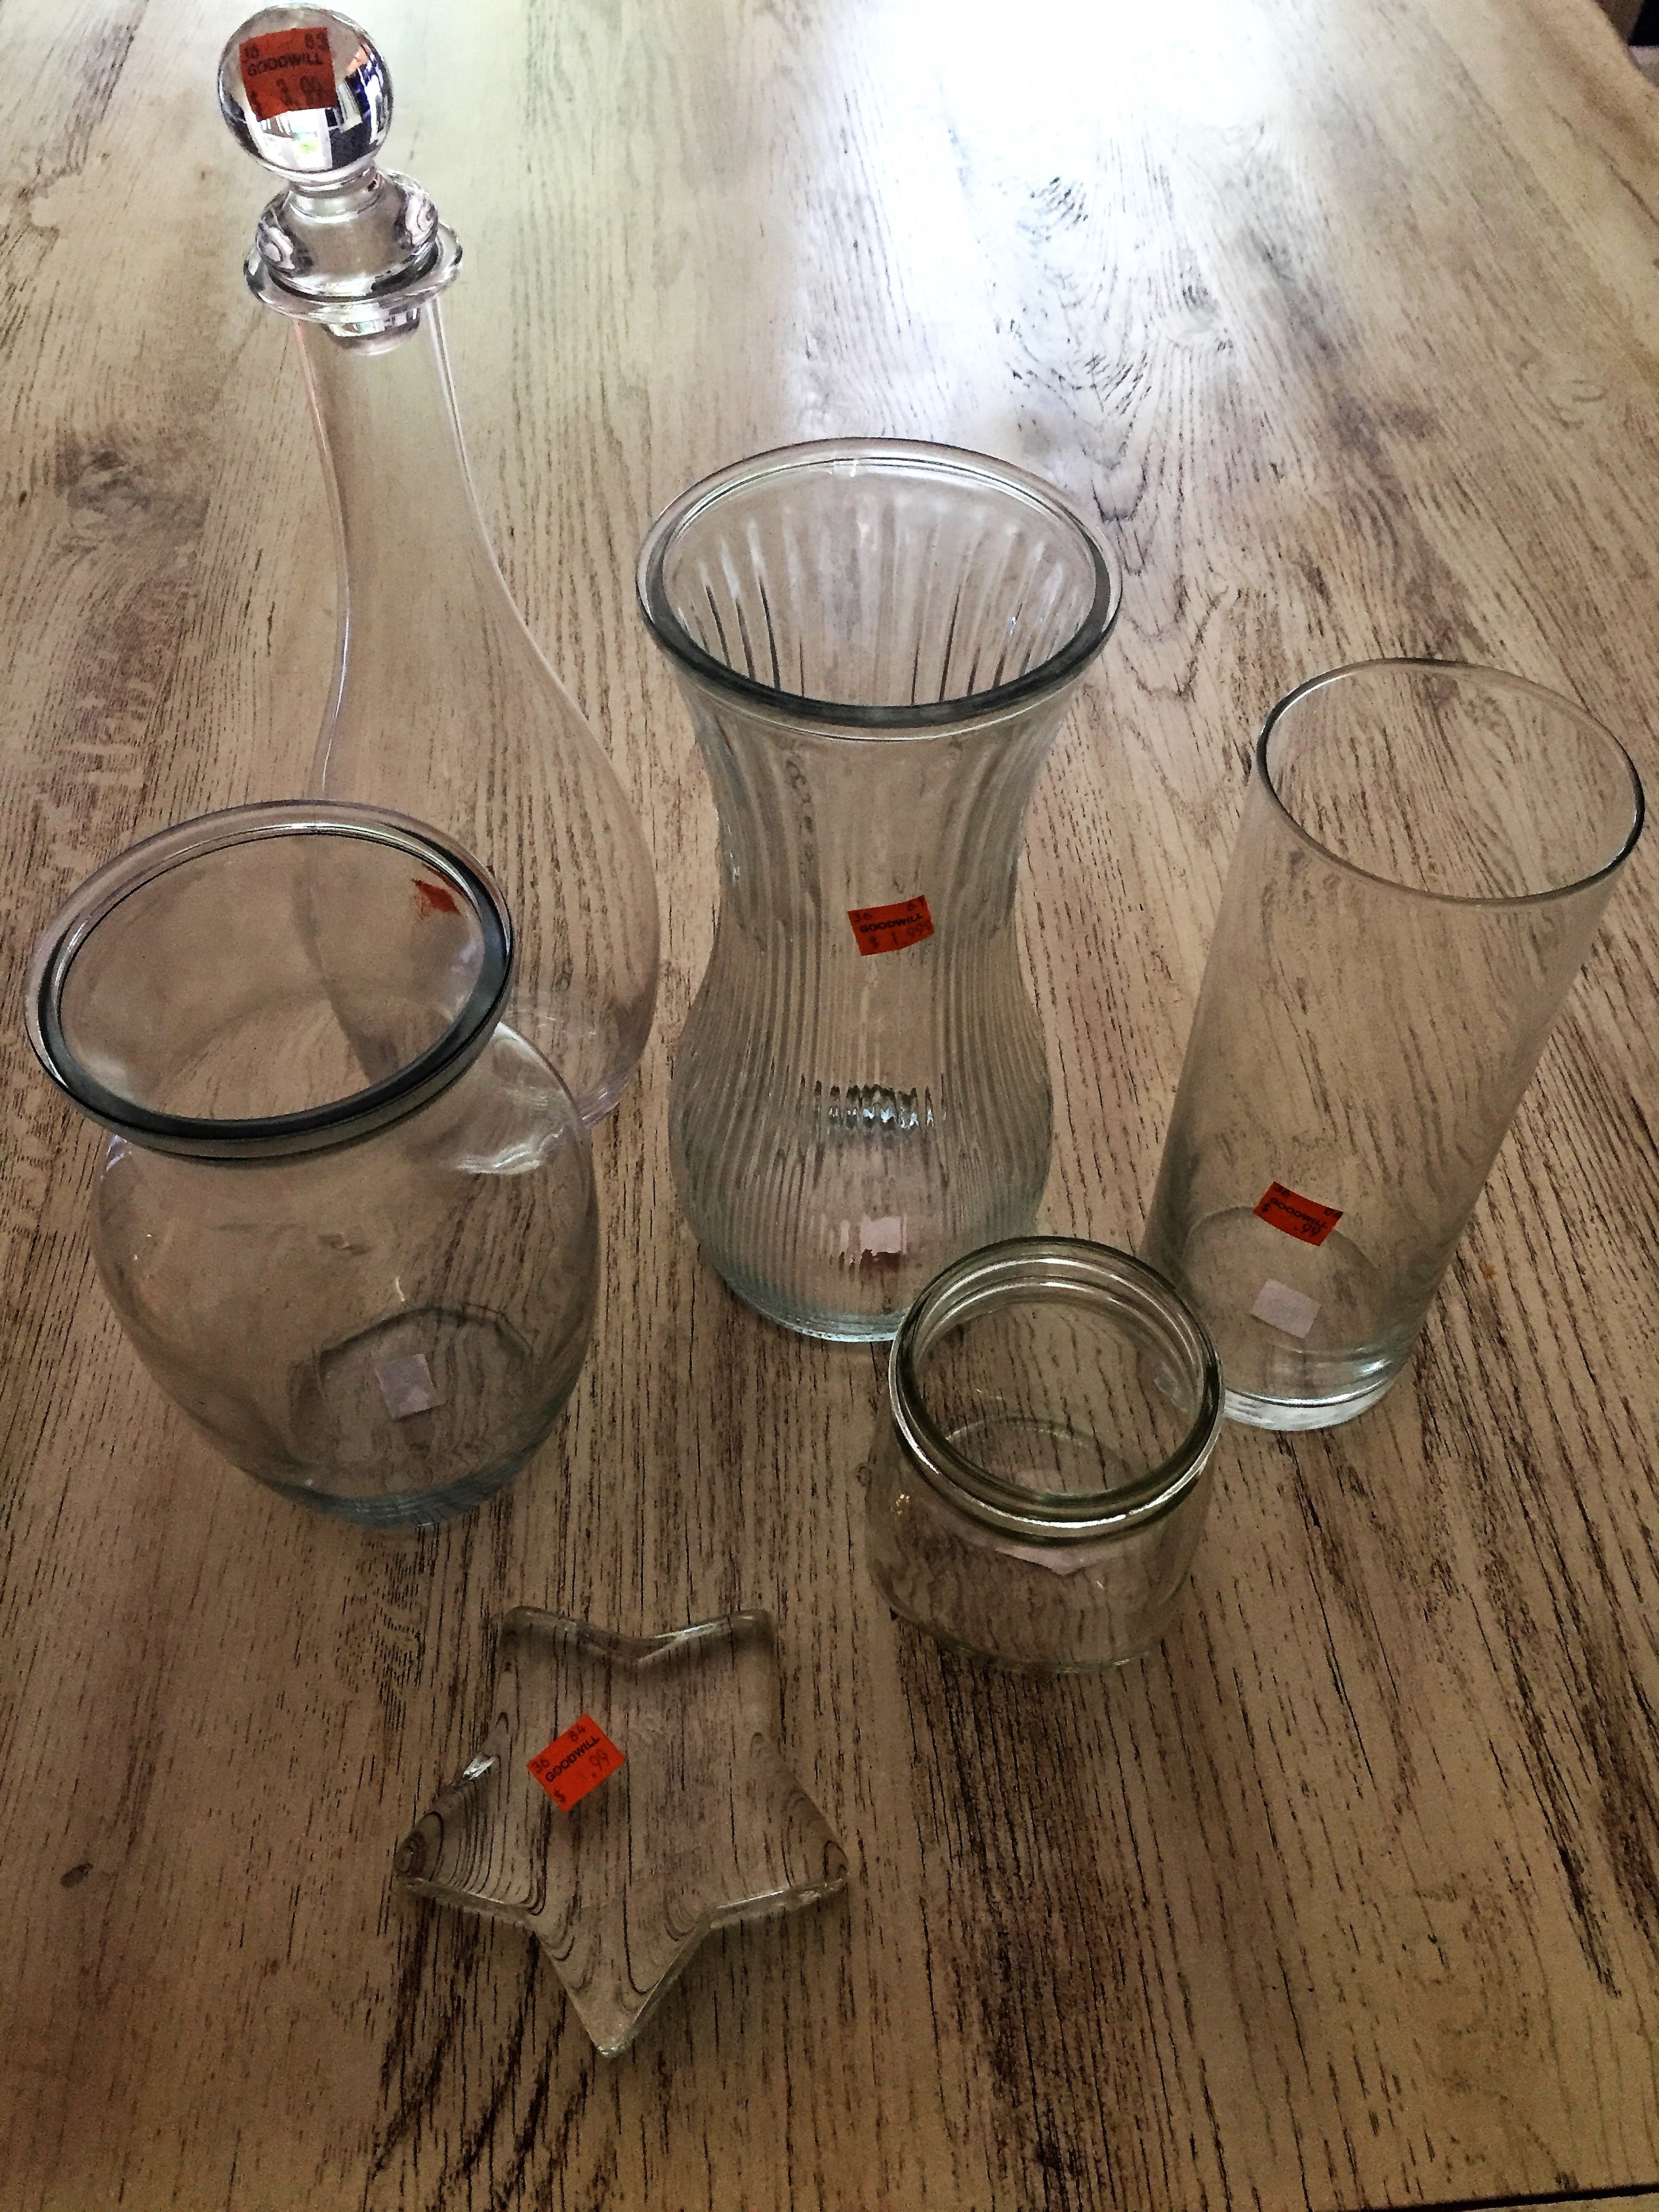 Courtney's glass items found a Goodwill before painting